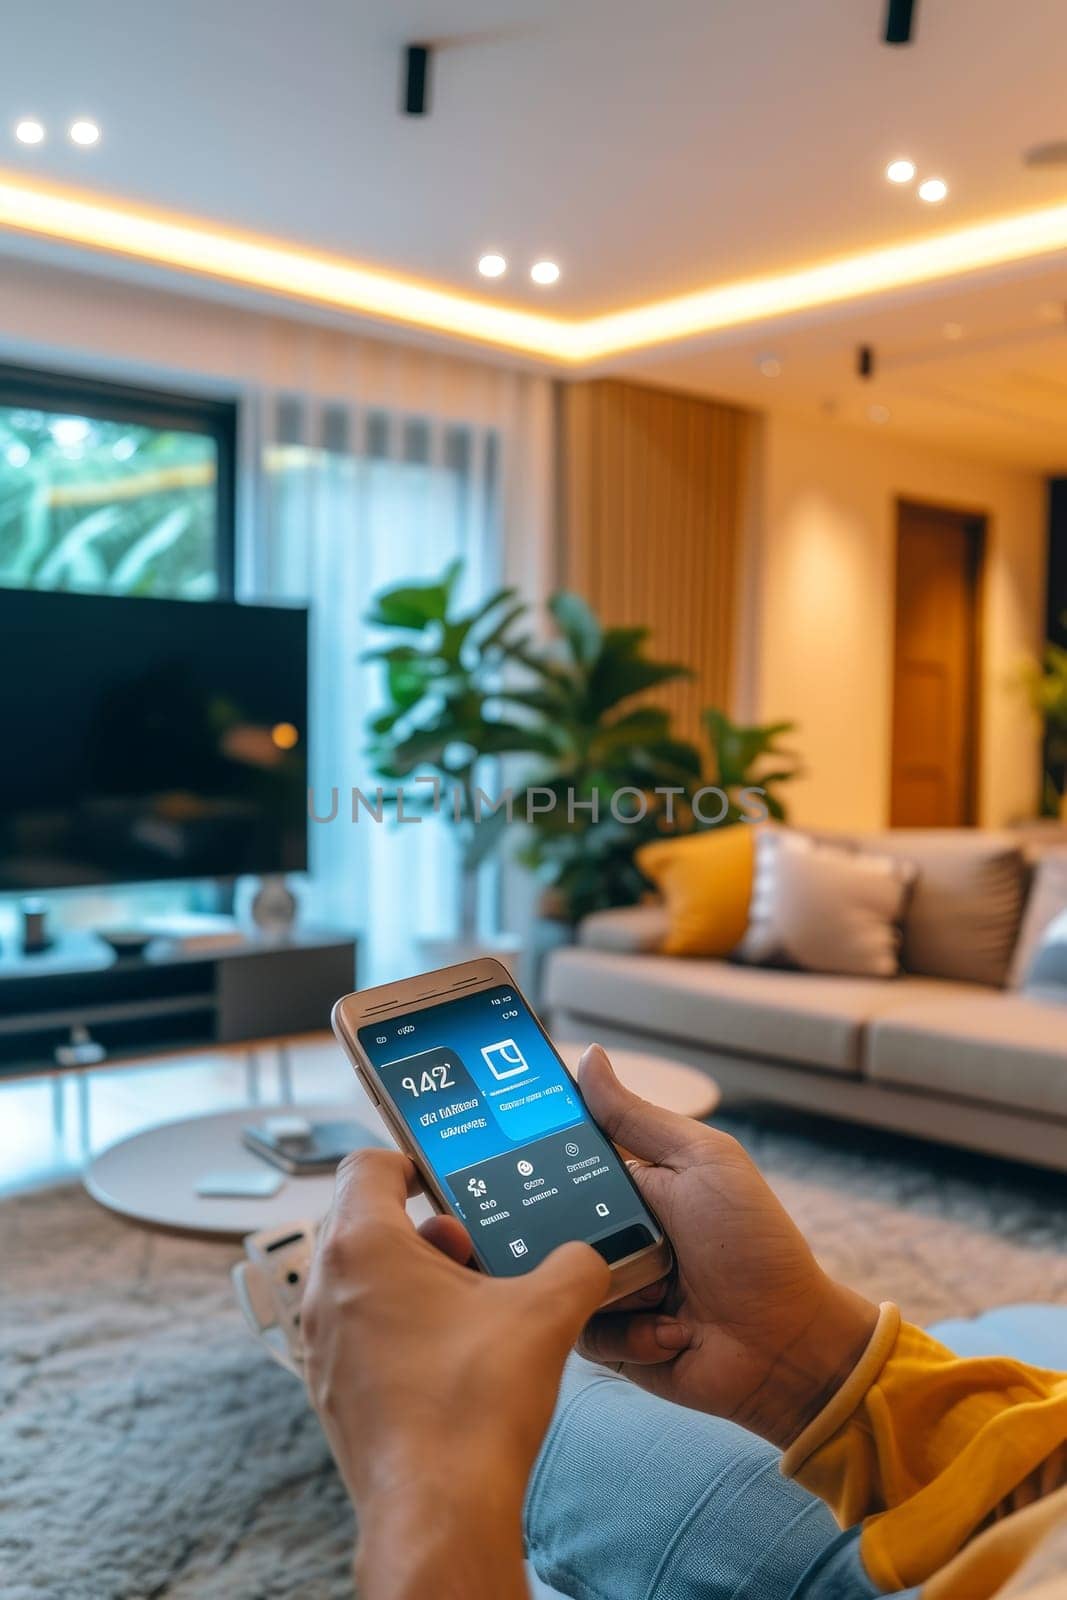 User interacting with an advanced smart home system through a smartphone in a modern, well-designed living space